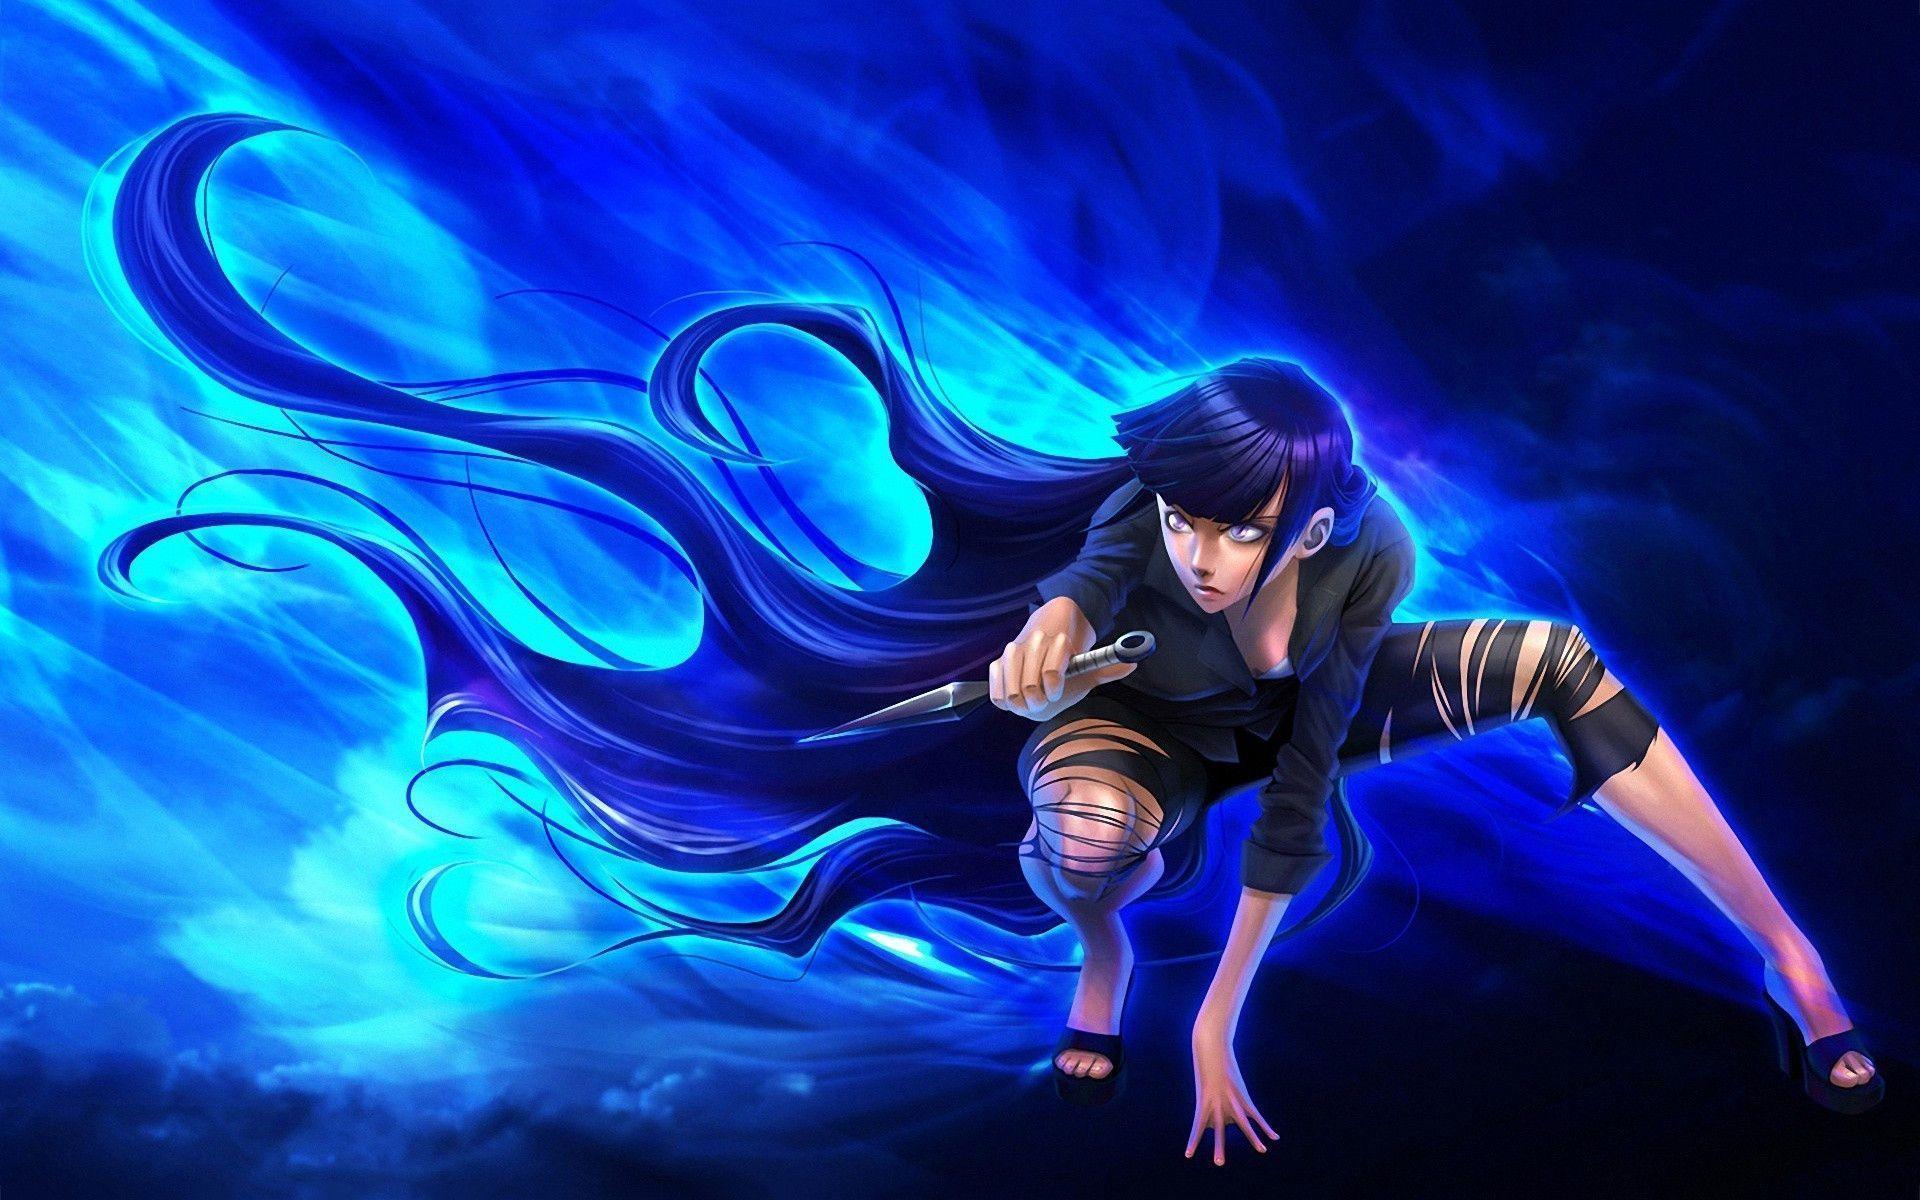 Free Download Naruto And Hinata Wallpapers 19x10 For Your Desktop Mobile Tablet Explore 73 Naruto And Hinata Wallpapers Hinata Hyuga Wallpaper Naruto Hd Wallpapers For Desktop Naruto The Last Movie Wallpaper